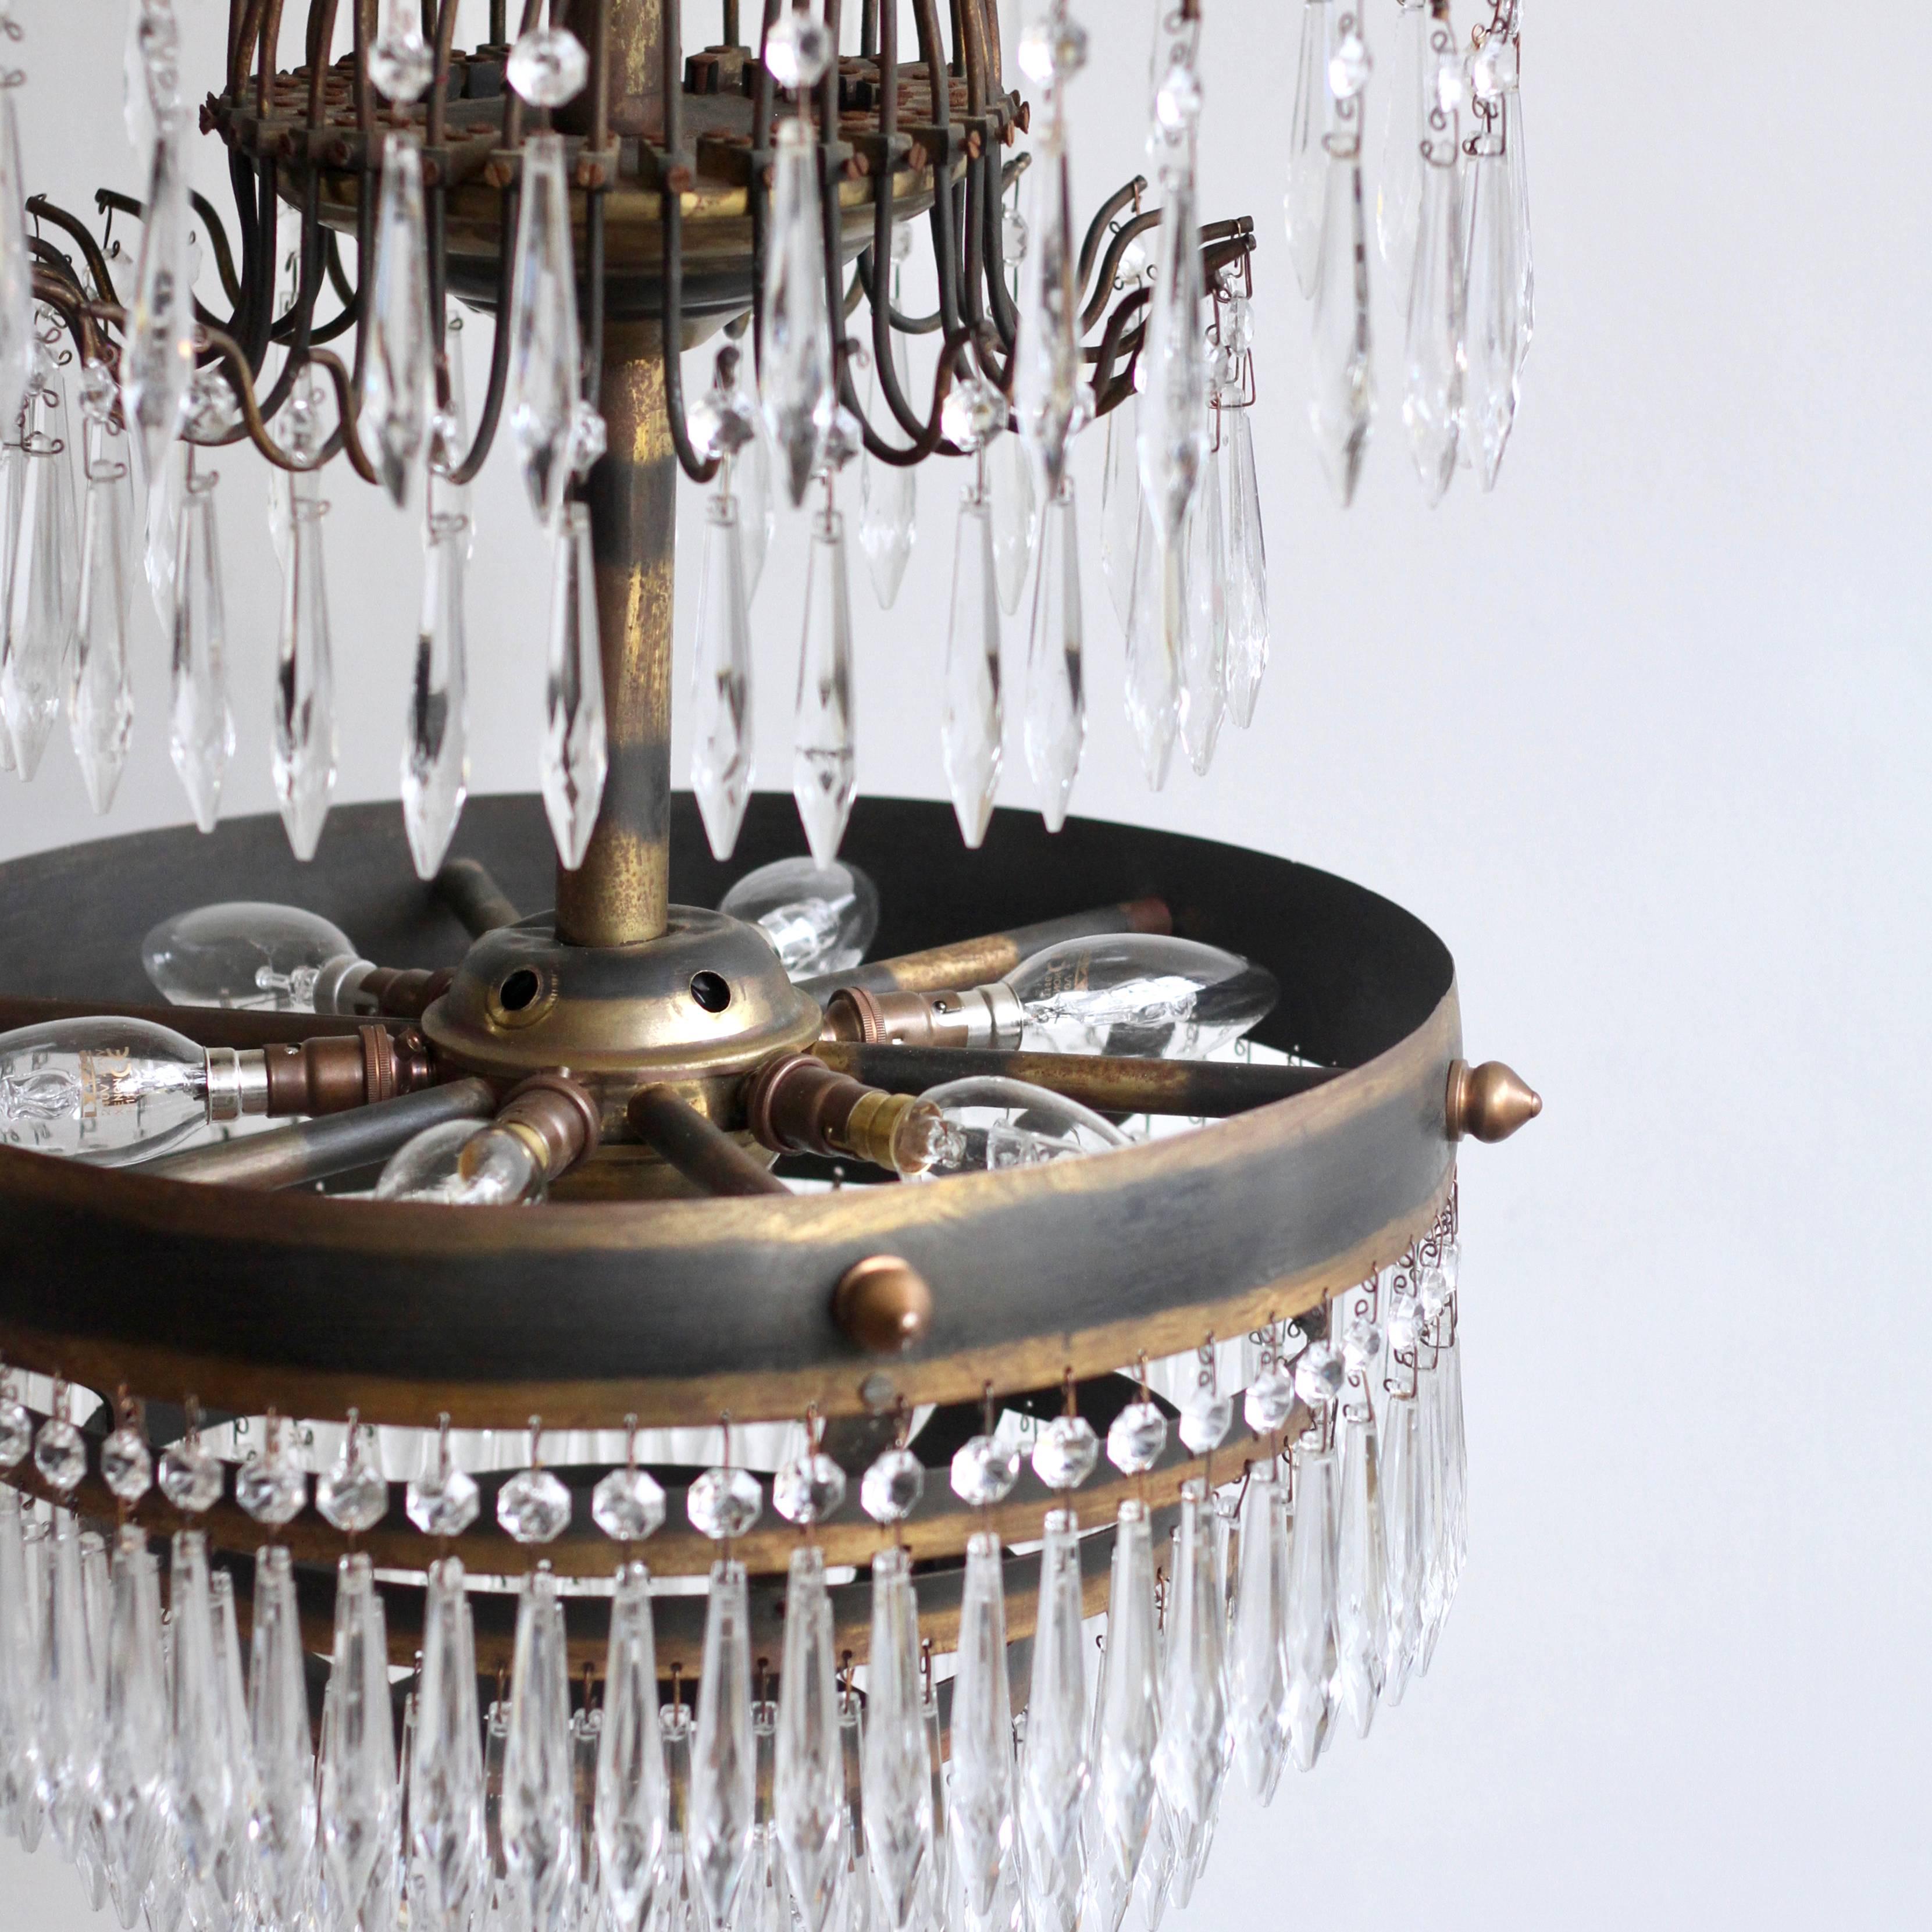 Early 1900s French waterfall chandelier. It has a delicate brass frame with five lower tiers adorned with faceted icicle drops. There are icicles on the top weeping willow-like branches. The chandelier comes supplied with braided flex, chain, a